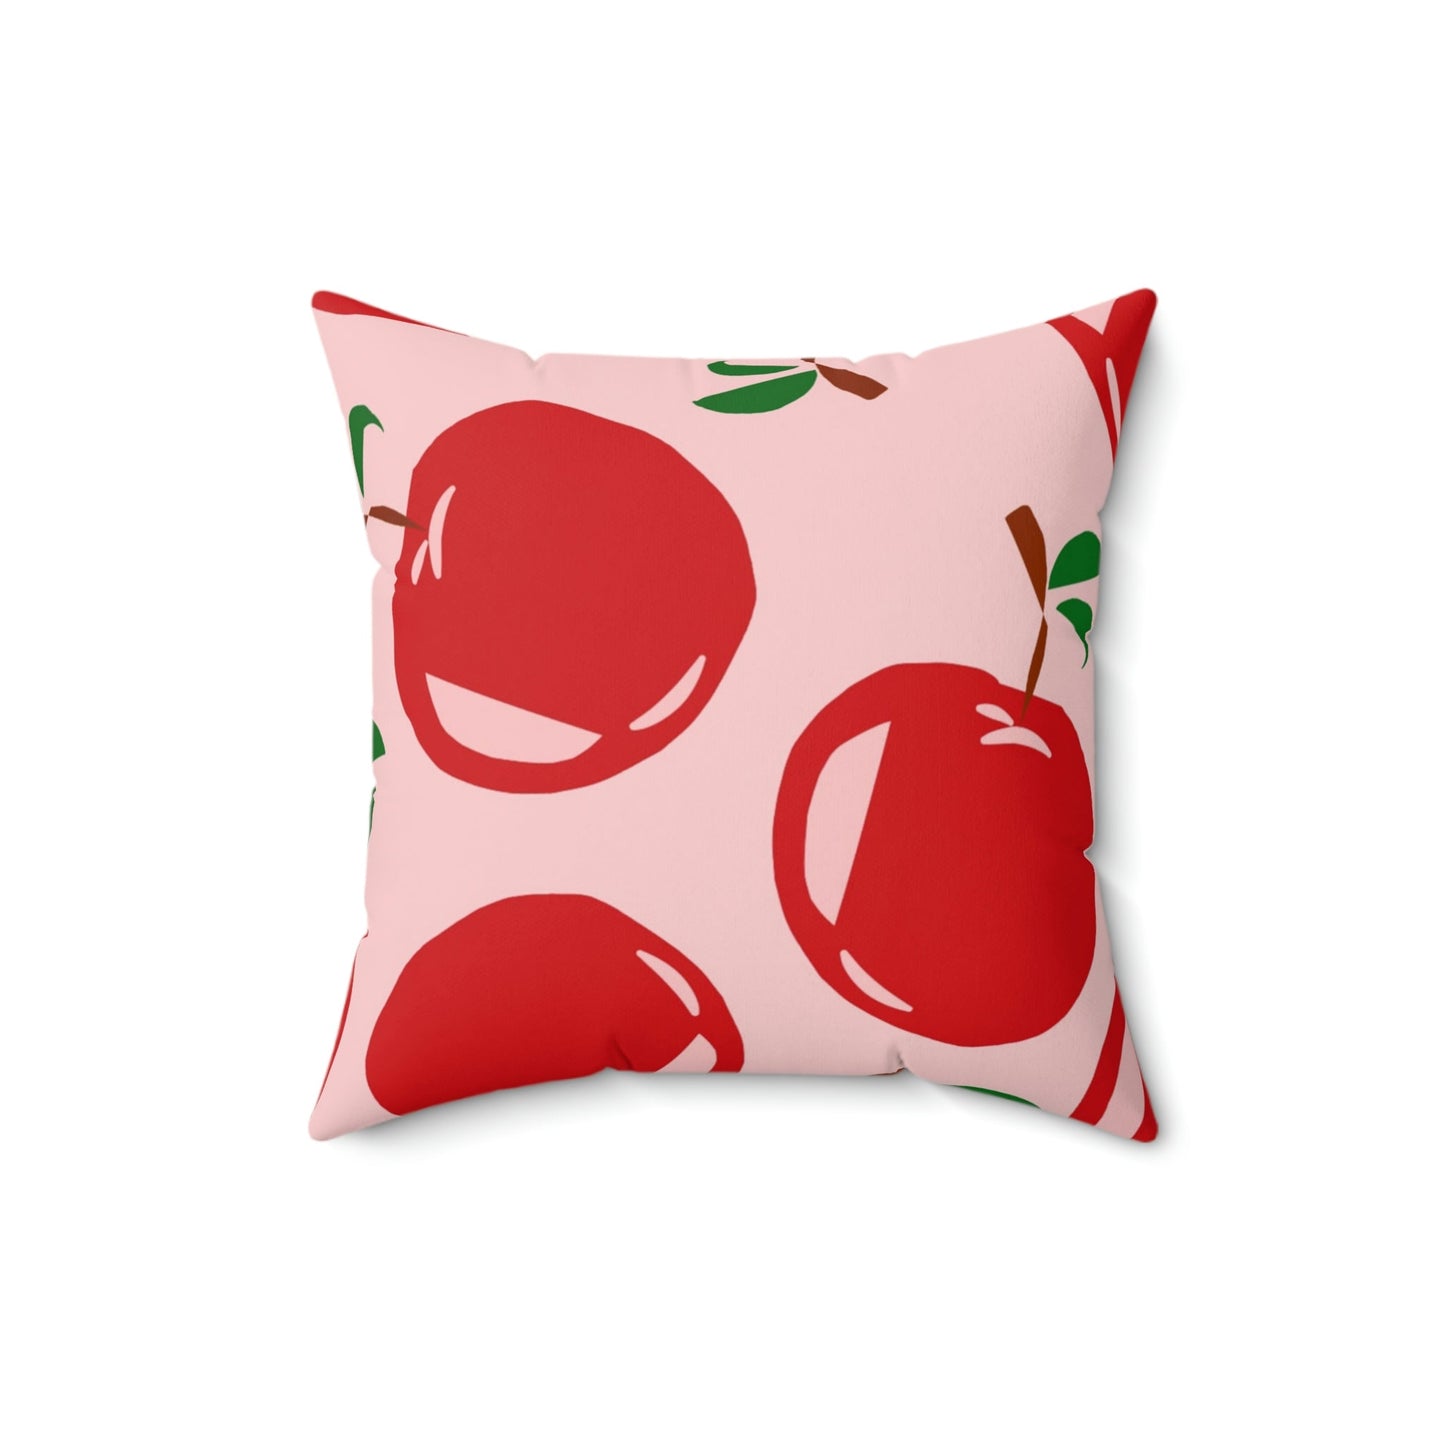 Delicious Red Apples Square Pillow Home Decor Pink Sweetheart